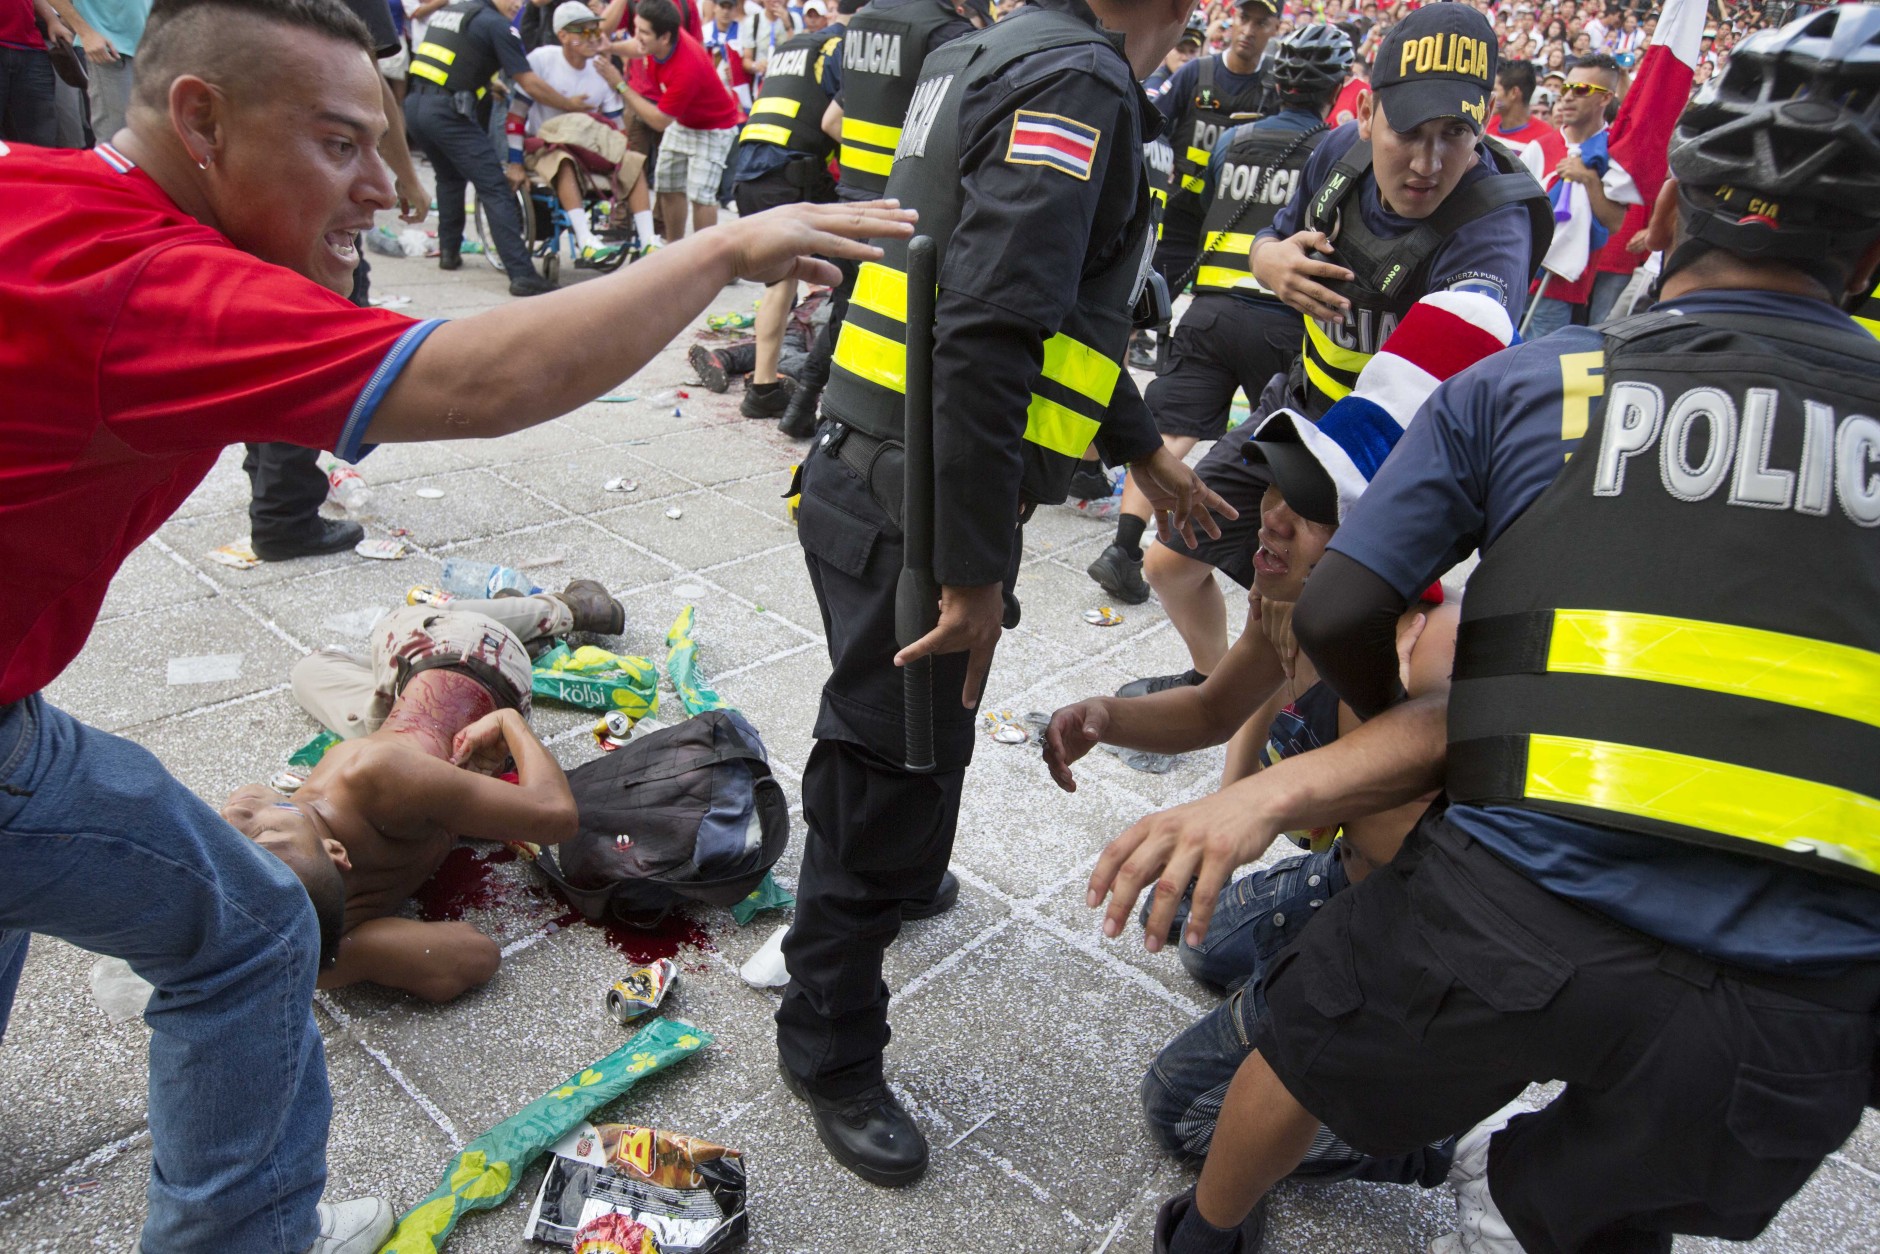 FOR USE AS DESIRED, YEAR END PHOTOS - FILE - A Costa Rica soccer fan is detained by the police while another fan lies on the ground injured with a knife, after a fight broke out during the live telecast of the quarterfinal World Cup match between Costa Rica and The Netherlands, at Democracy square in San Jose, Costa Rica, Saturday, July 5, 2014. Dutch Goalie Tim Krul came on as a substitute in the final minute of extra time and then saved two penalties in a 4-3 shootout victory over Costa Rica on Saturday, giving the Netherlands a spot in the World Cup semifinals. (AP Photo/Esteban Felix, File)